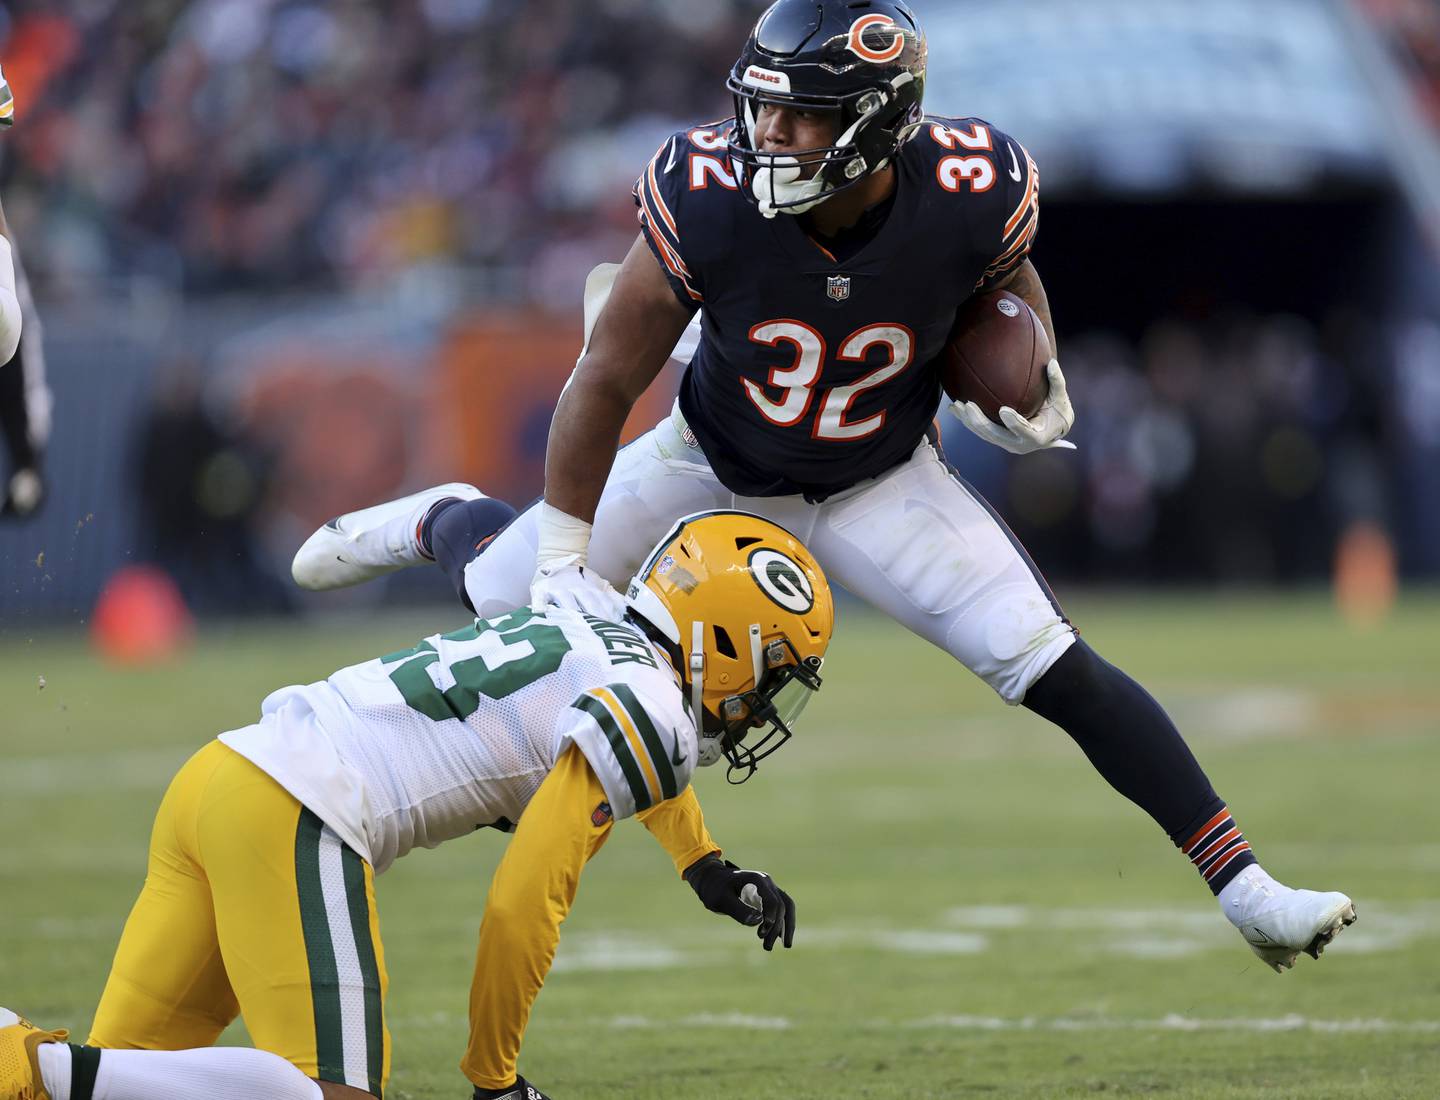 Bears running back David Montgomery (32) leaps over Packers cornerback Jaire Alexander (23) on Dec. 4, 2022, at Soldier Field.